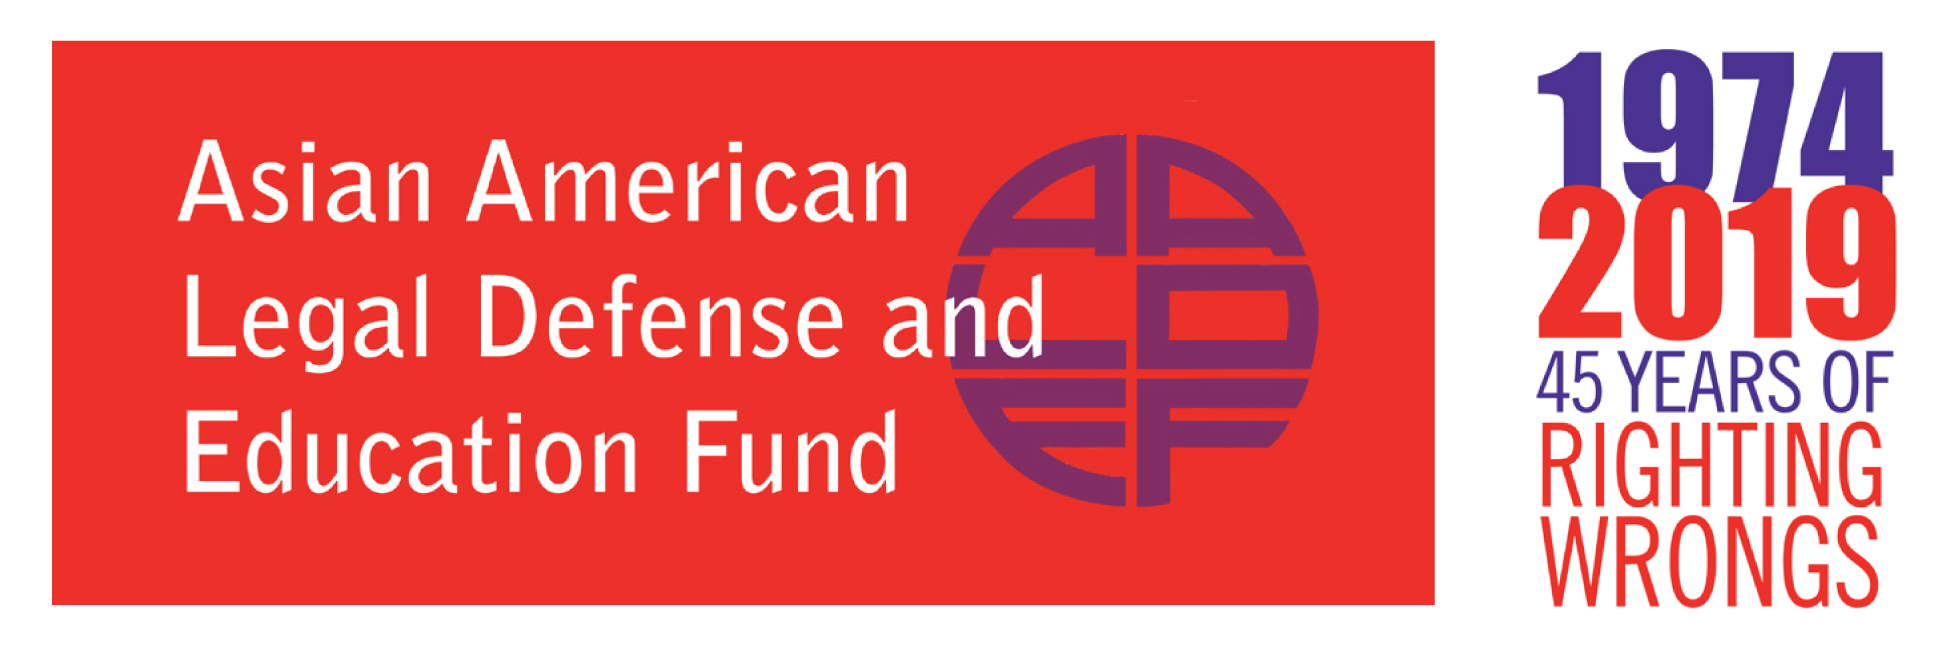 Asian American Legal Defense and Education Fund